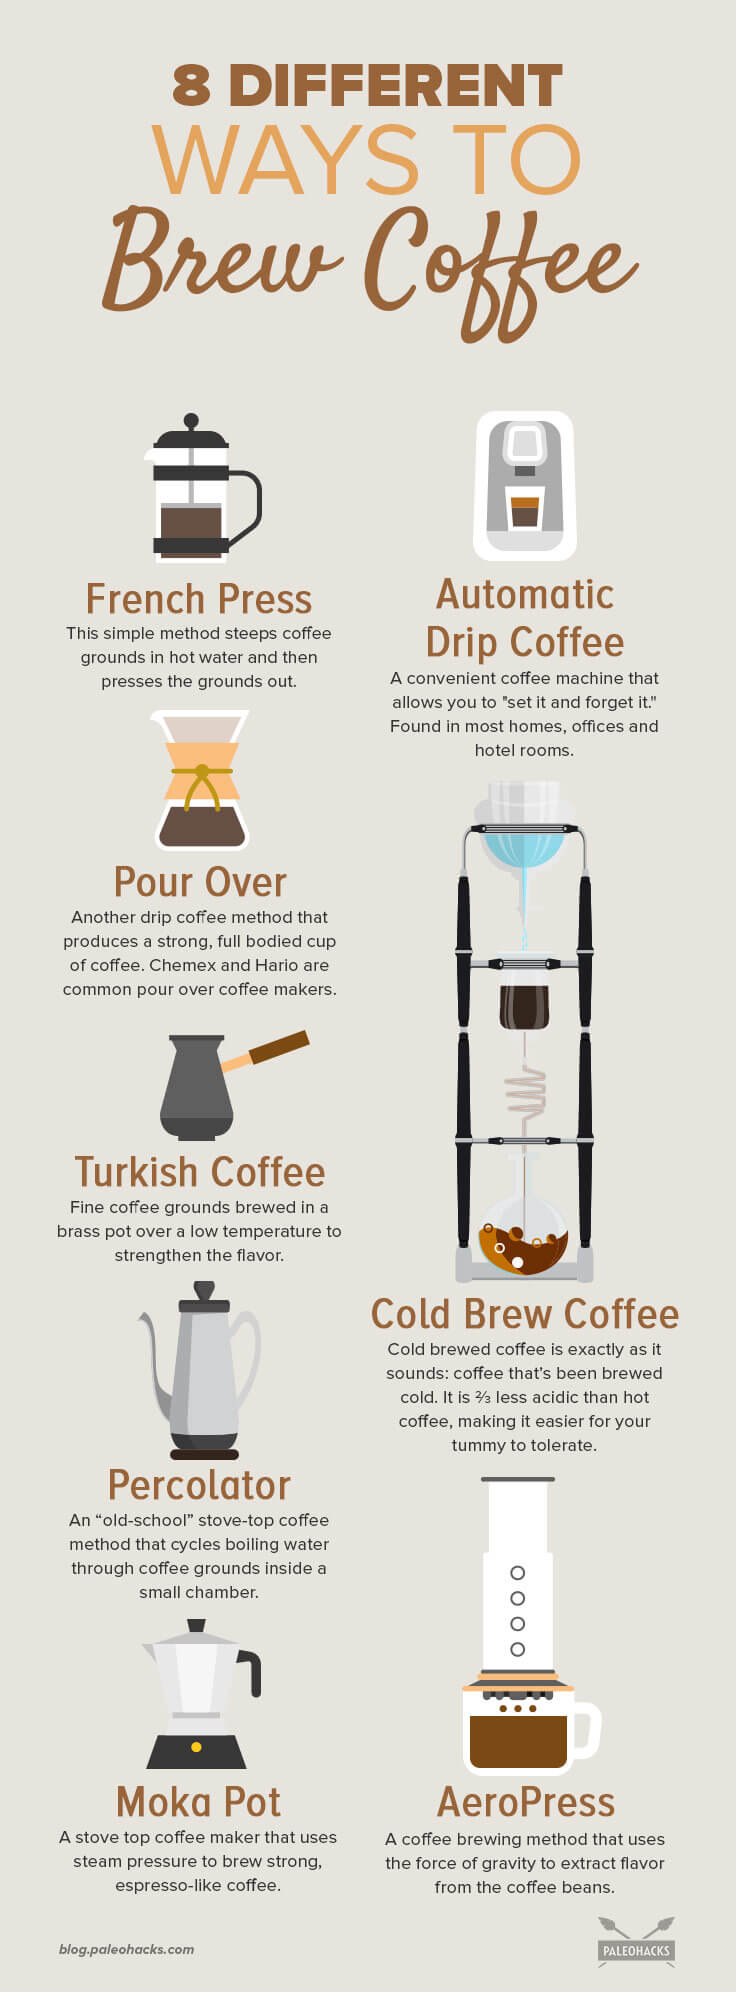 With countless coffee brewing methods available, does it matter if your morning cuppa comes from a French Press, a drip machine, or a even a percolator?